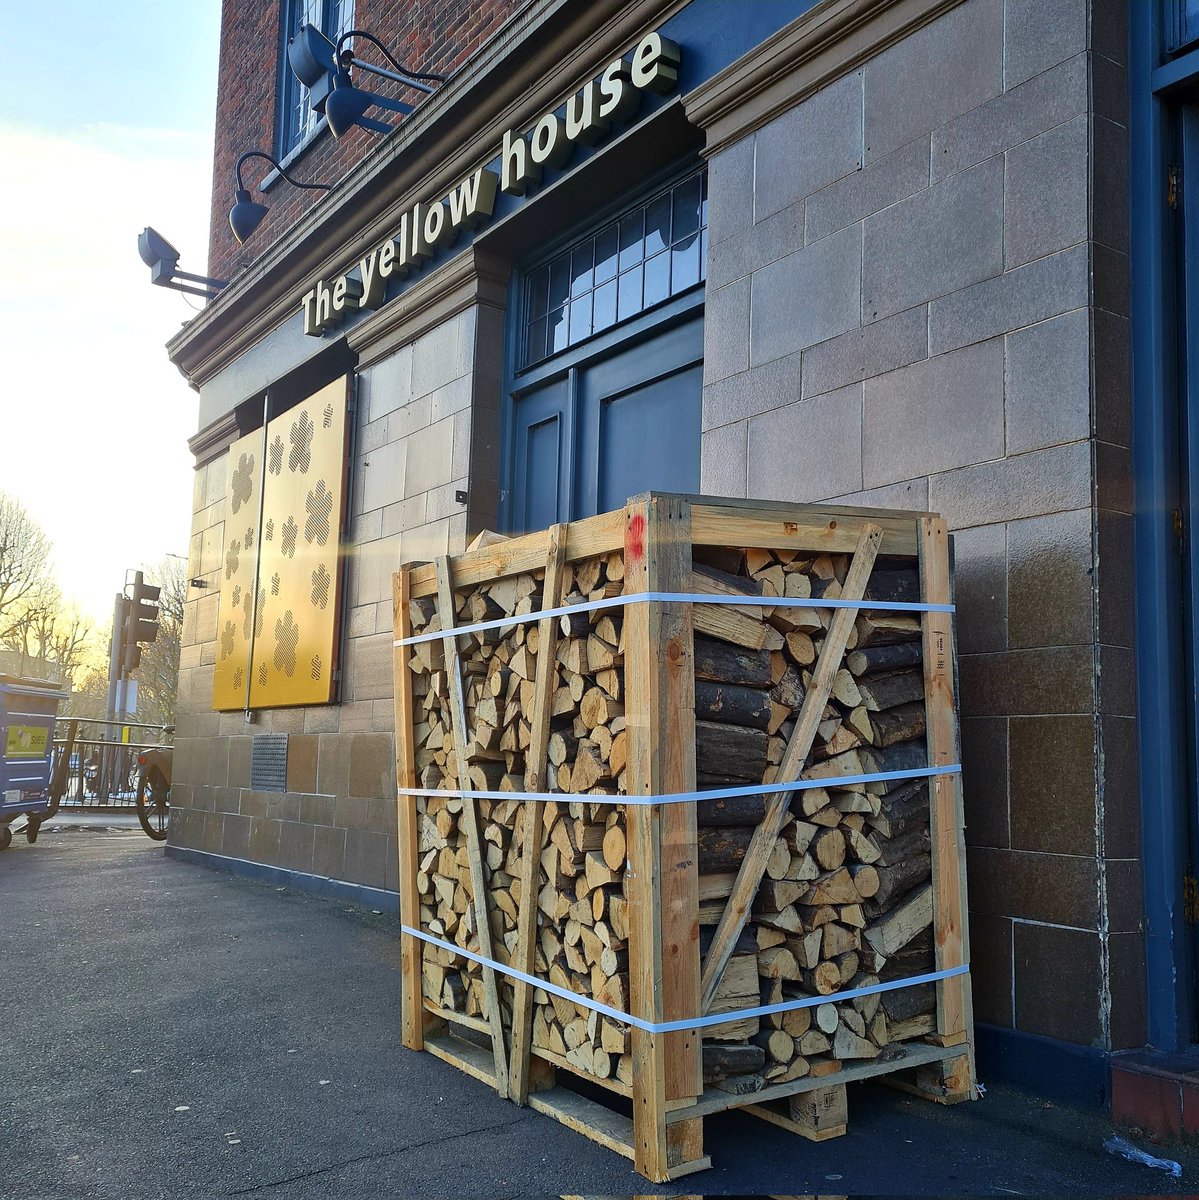 Early morning delivery of logs for our woodburning stove in the bar, for cosy evenings with friends and family 

#logs #woodburningstove #woodburner #woodburning #stove #cosy #snug #hygge #Theyellowhouse #bar #restaurant